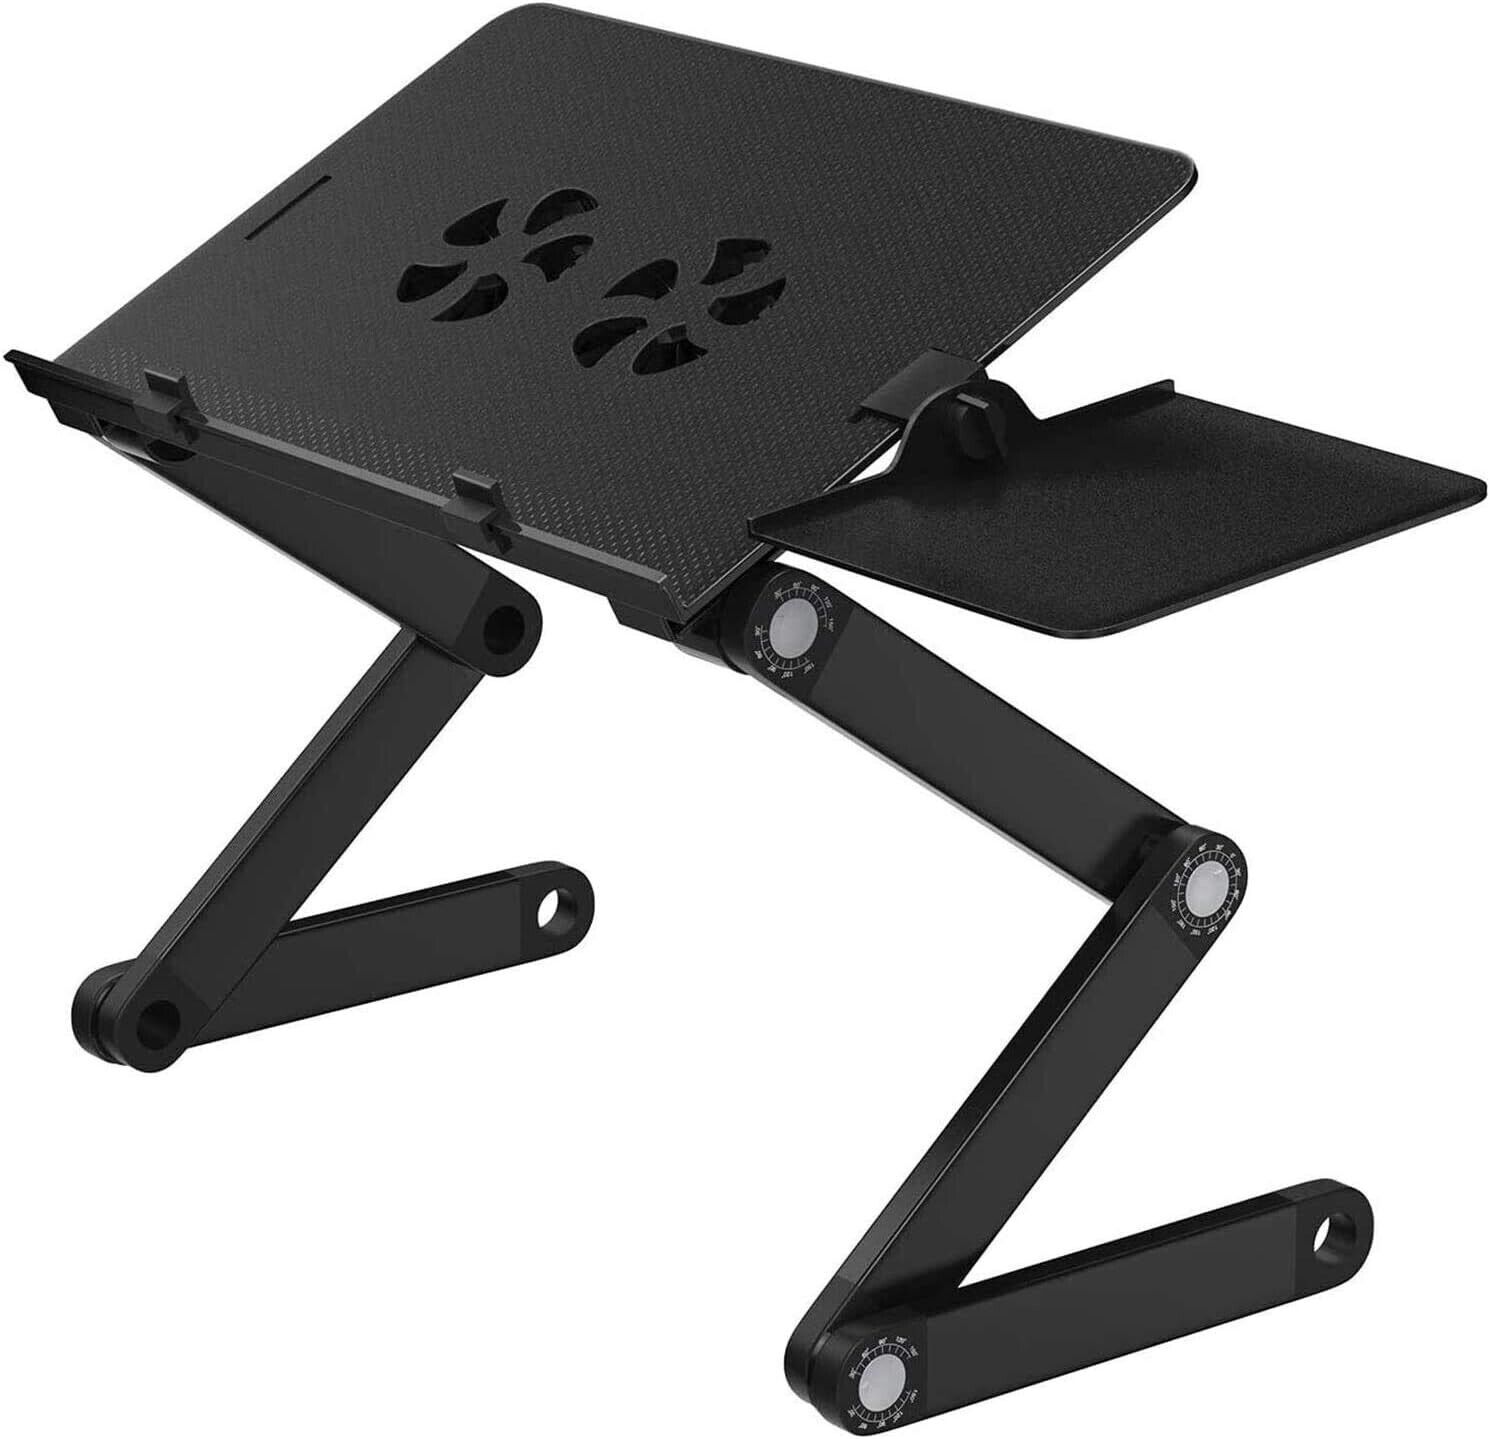 Adjustable Laptop Stand, Portable Laptop Table Stand with 2 CPU Cooling Fans